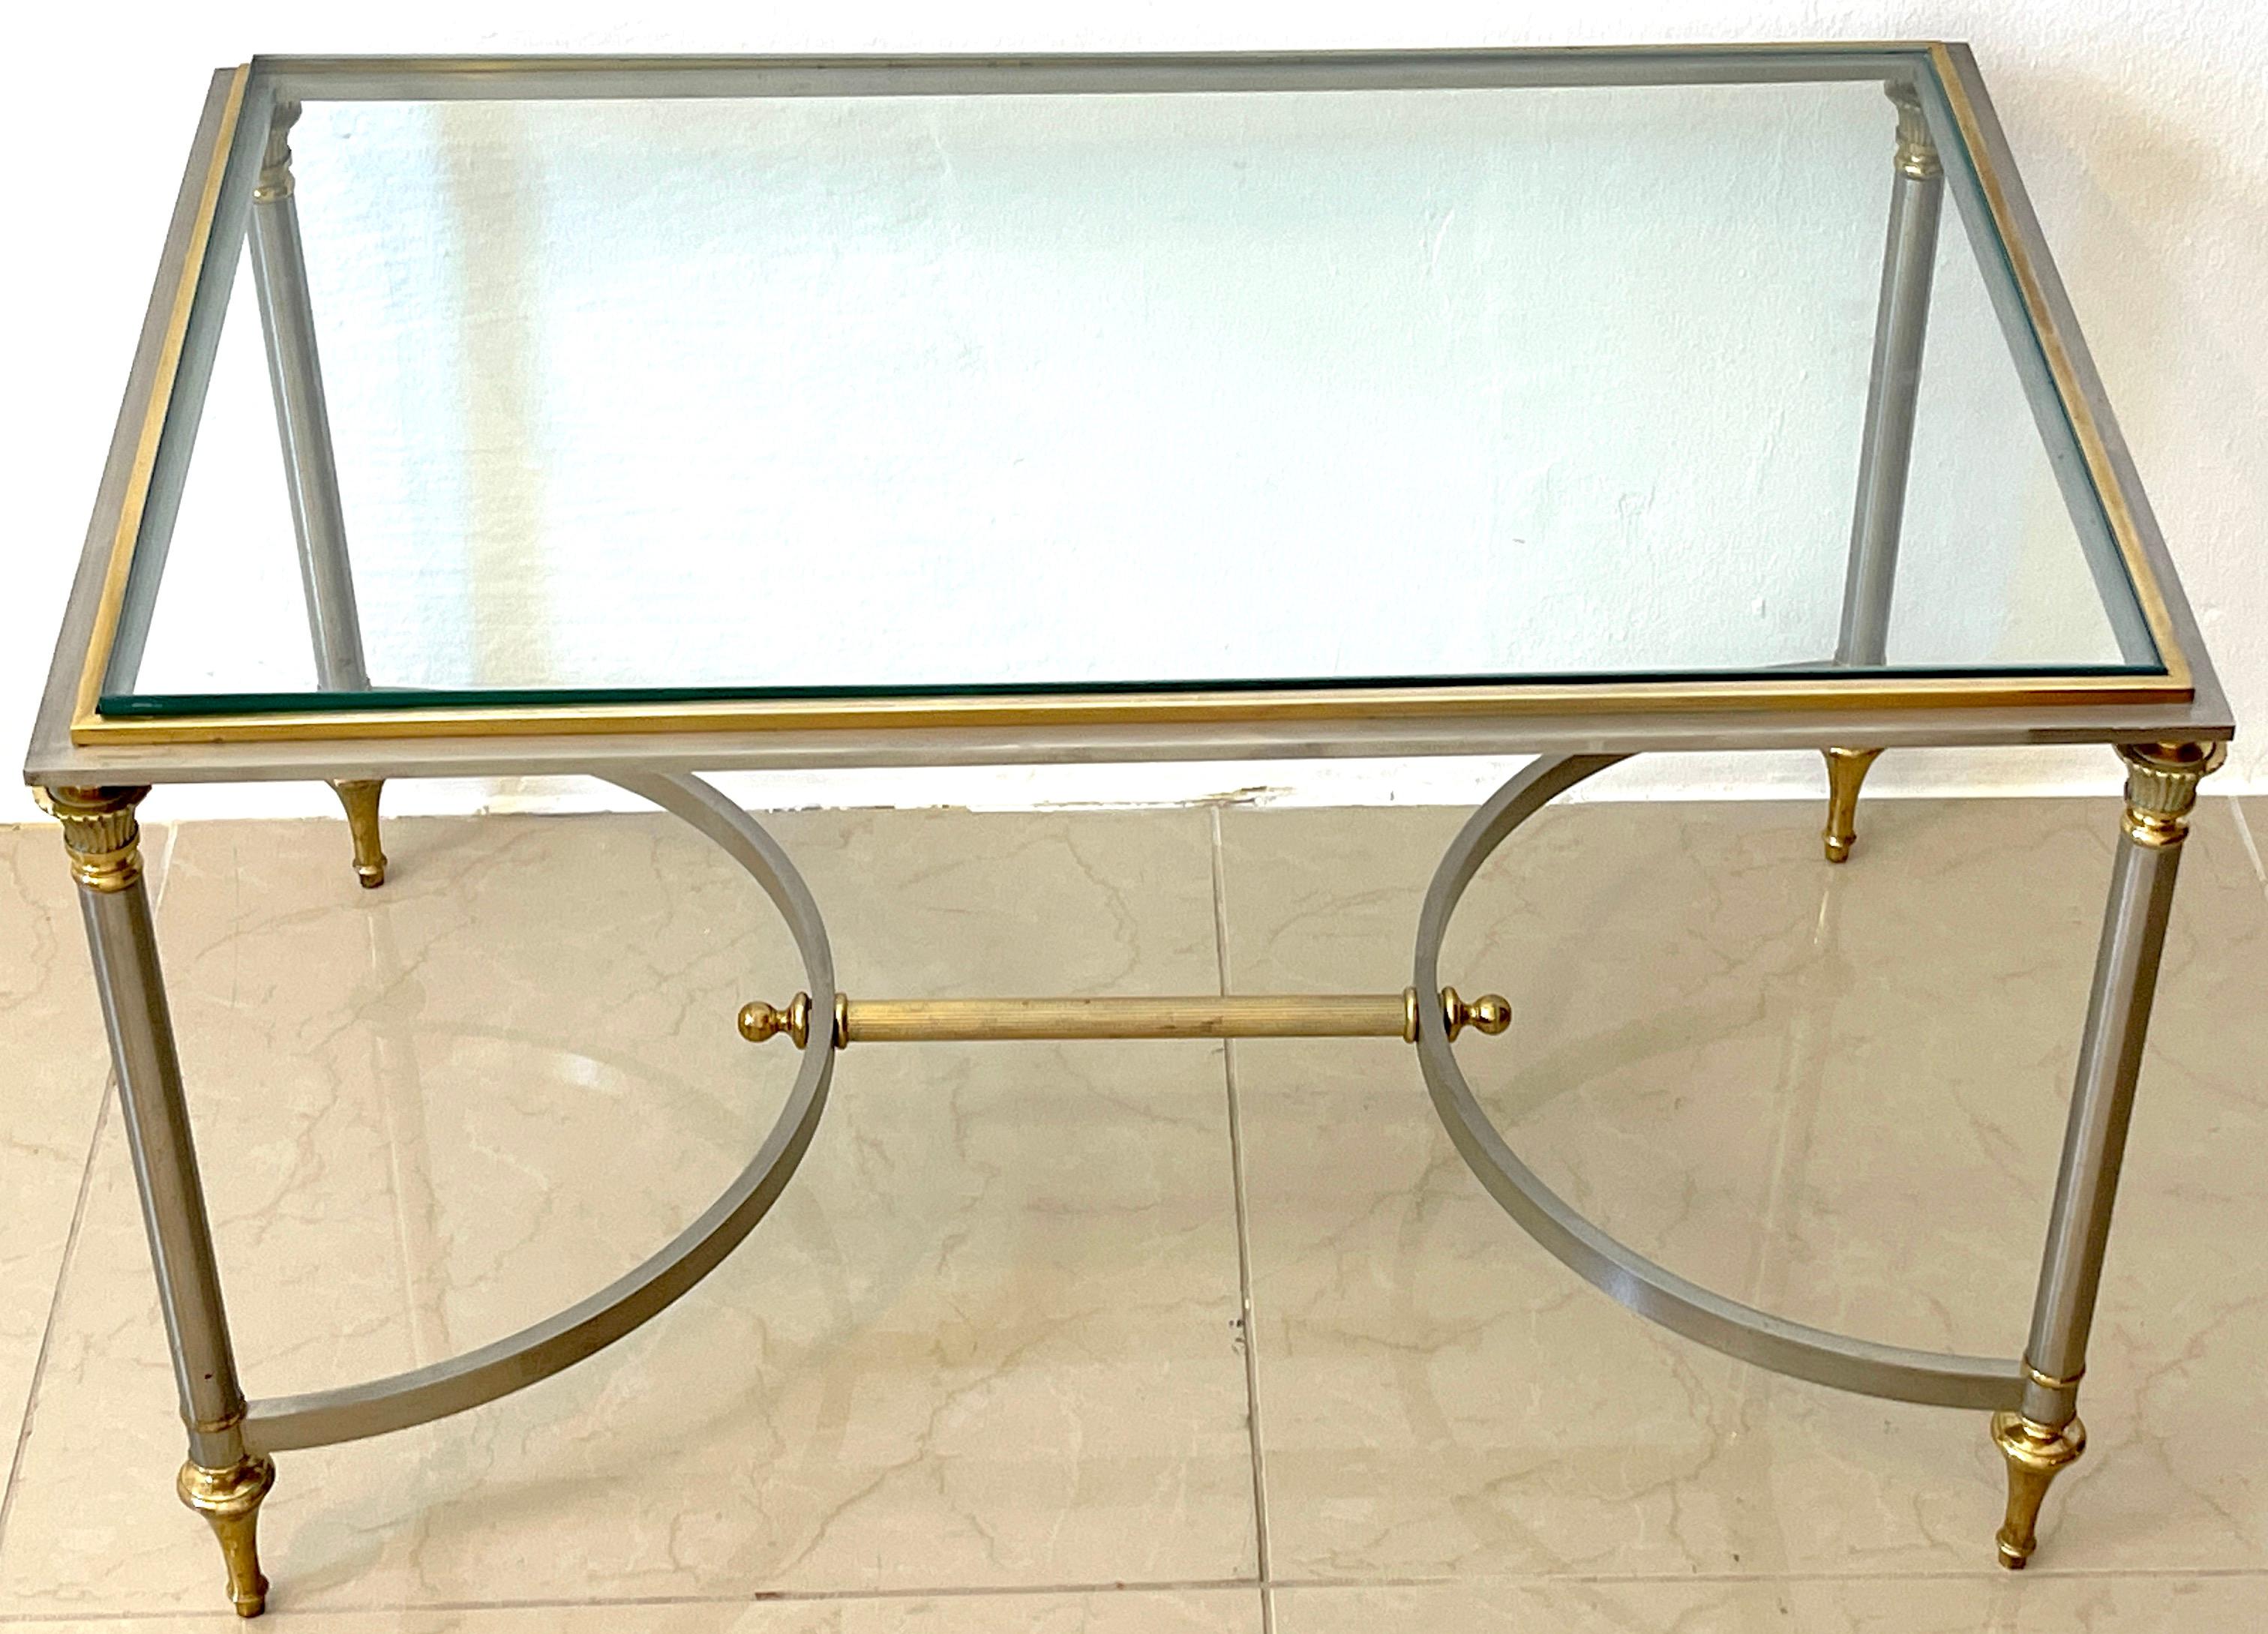 20th Century French Neoclassical Steel & Gilt Bronze Coffee Table, Style of Maison Jansen